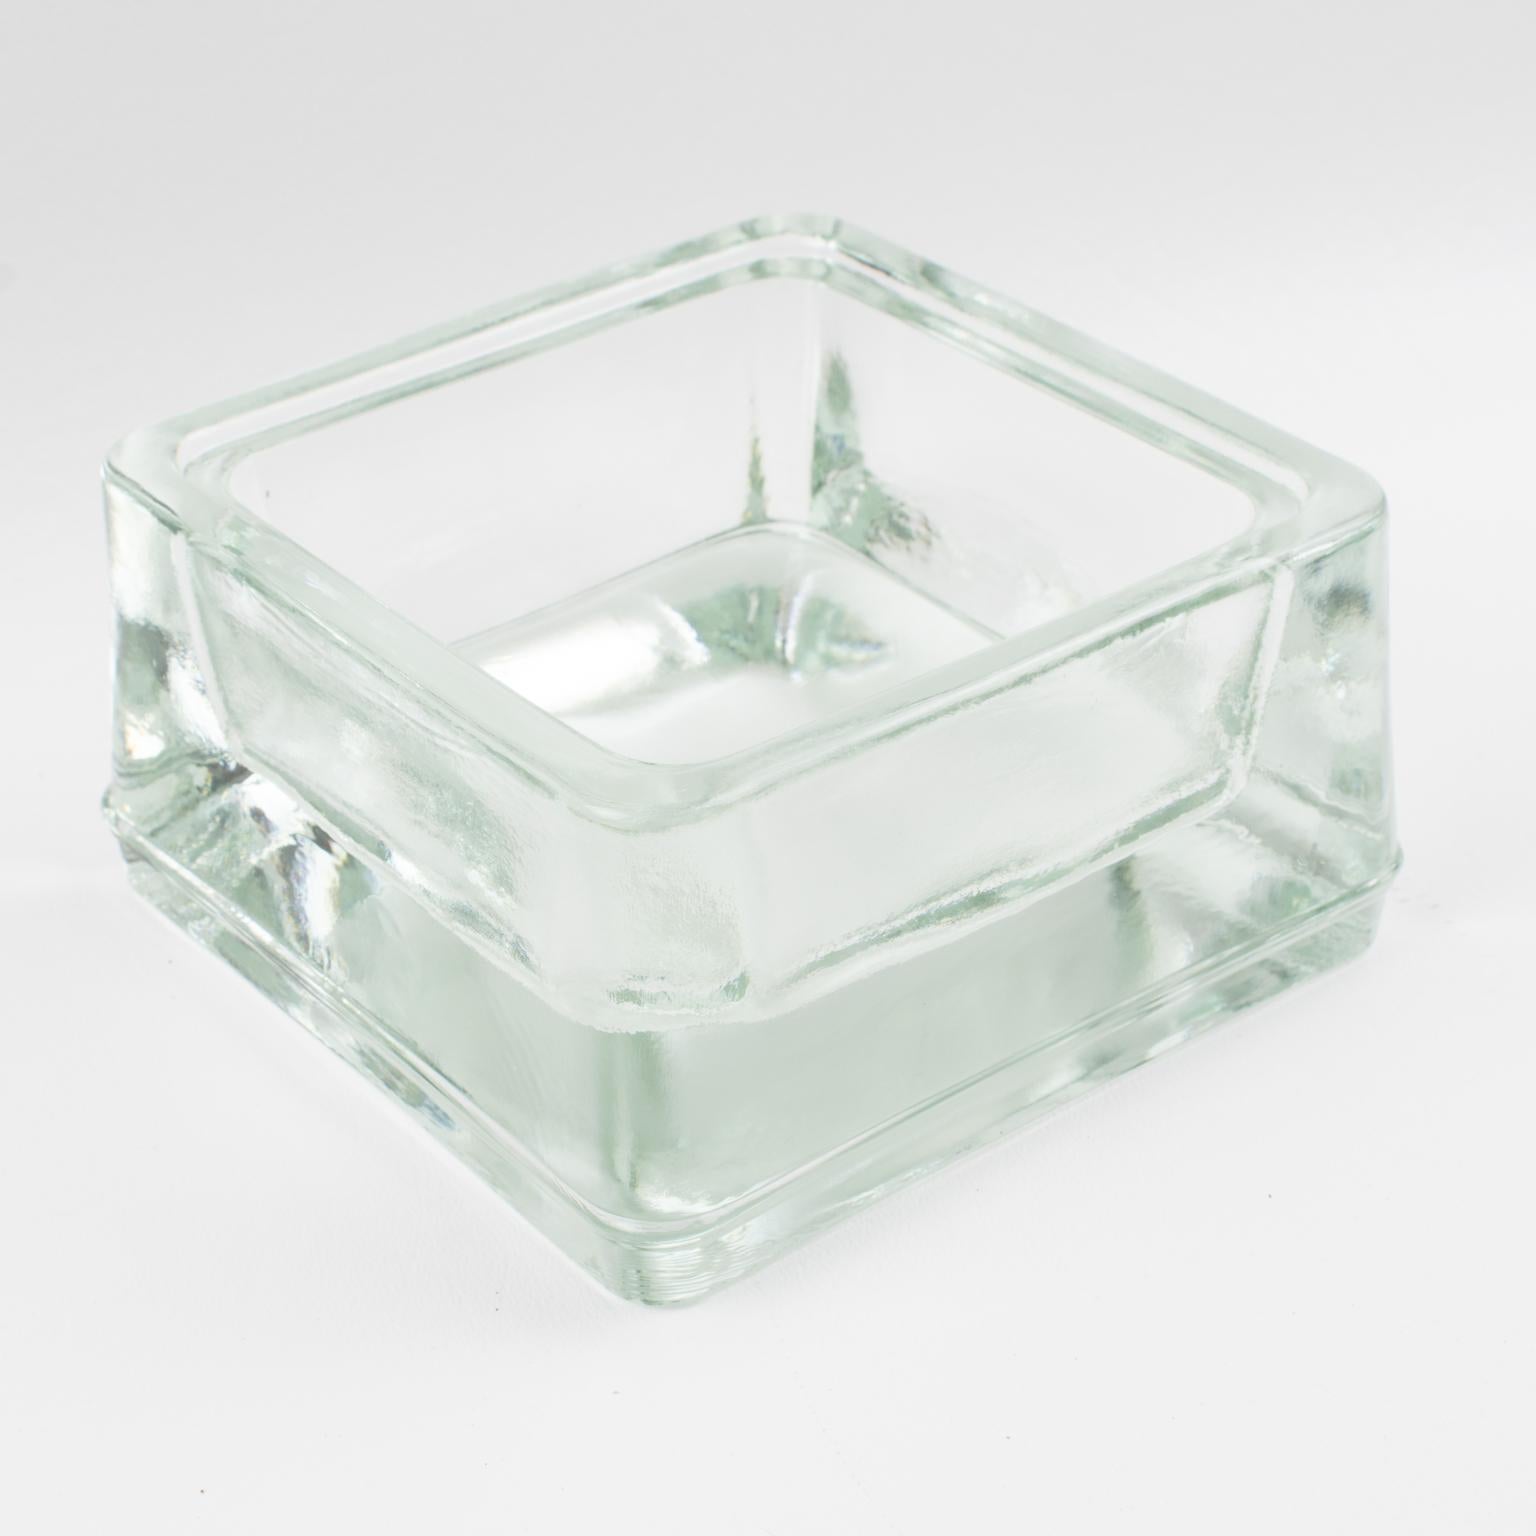 French Lumax Molded Glass Desk Accessory Ashtray Catchall, Design by Le Corbusier For Sale